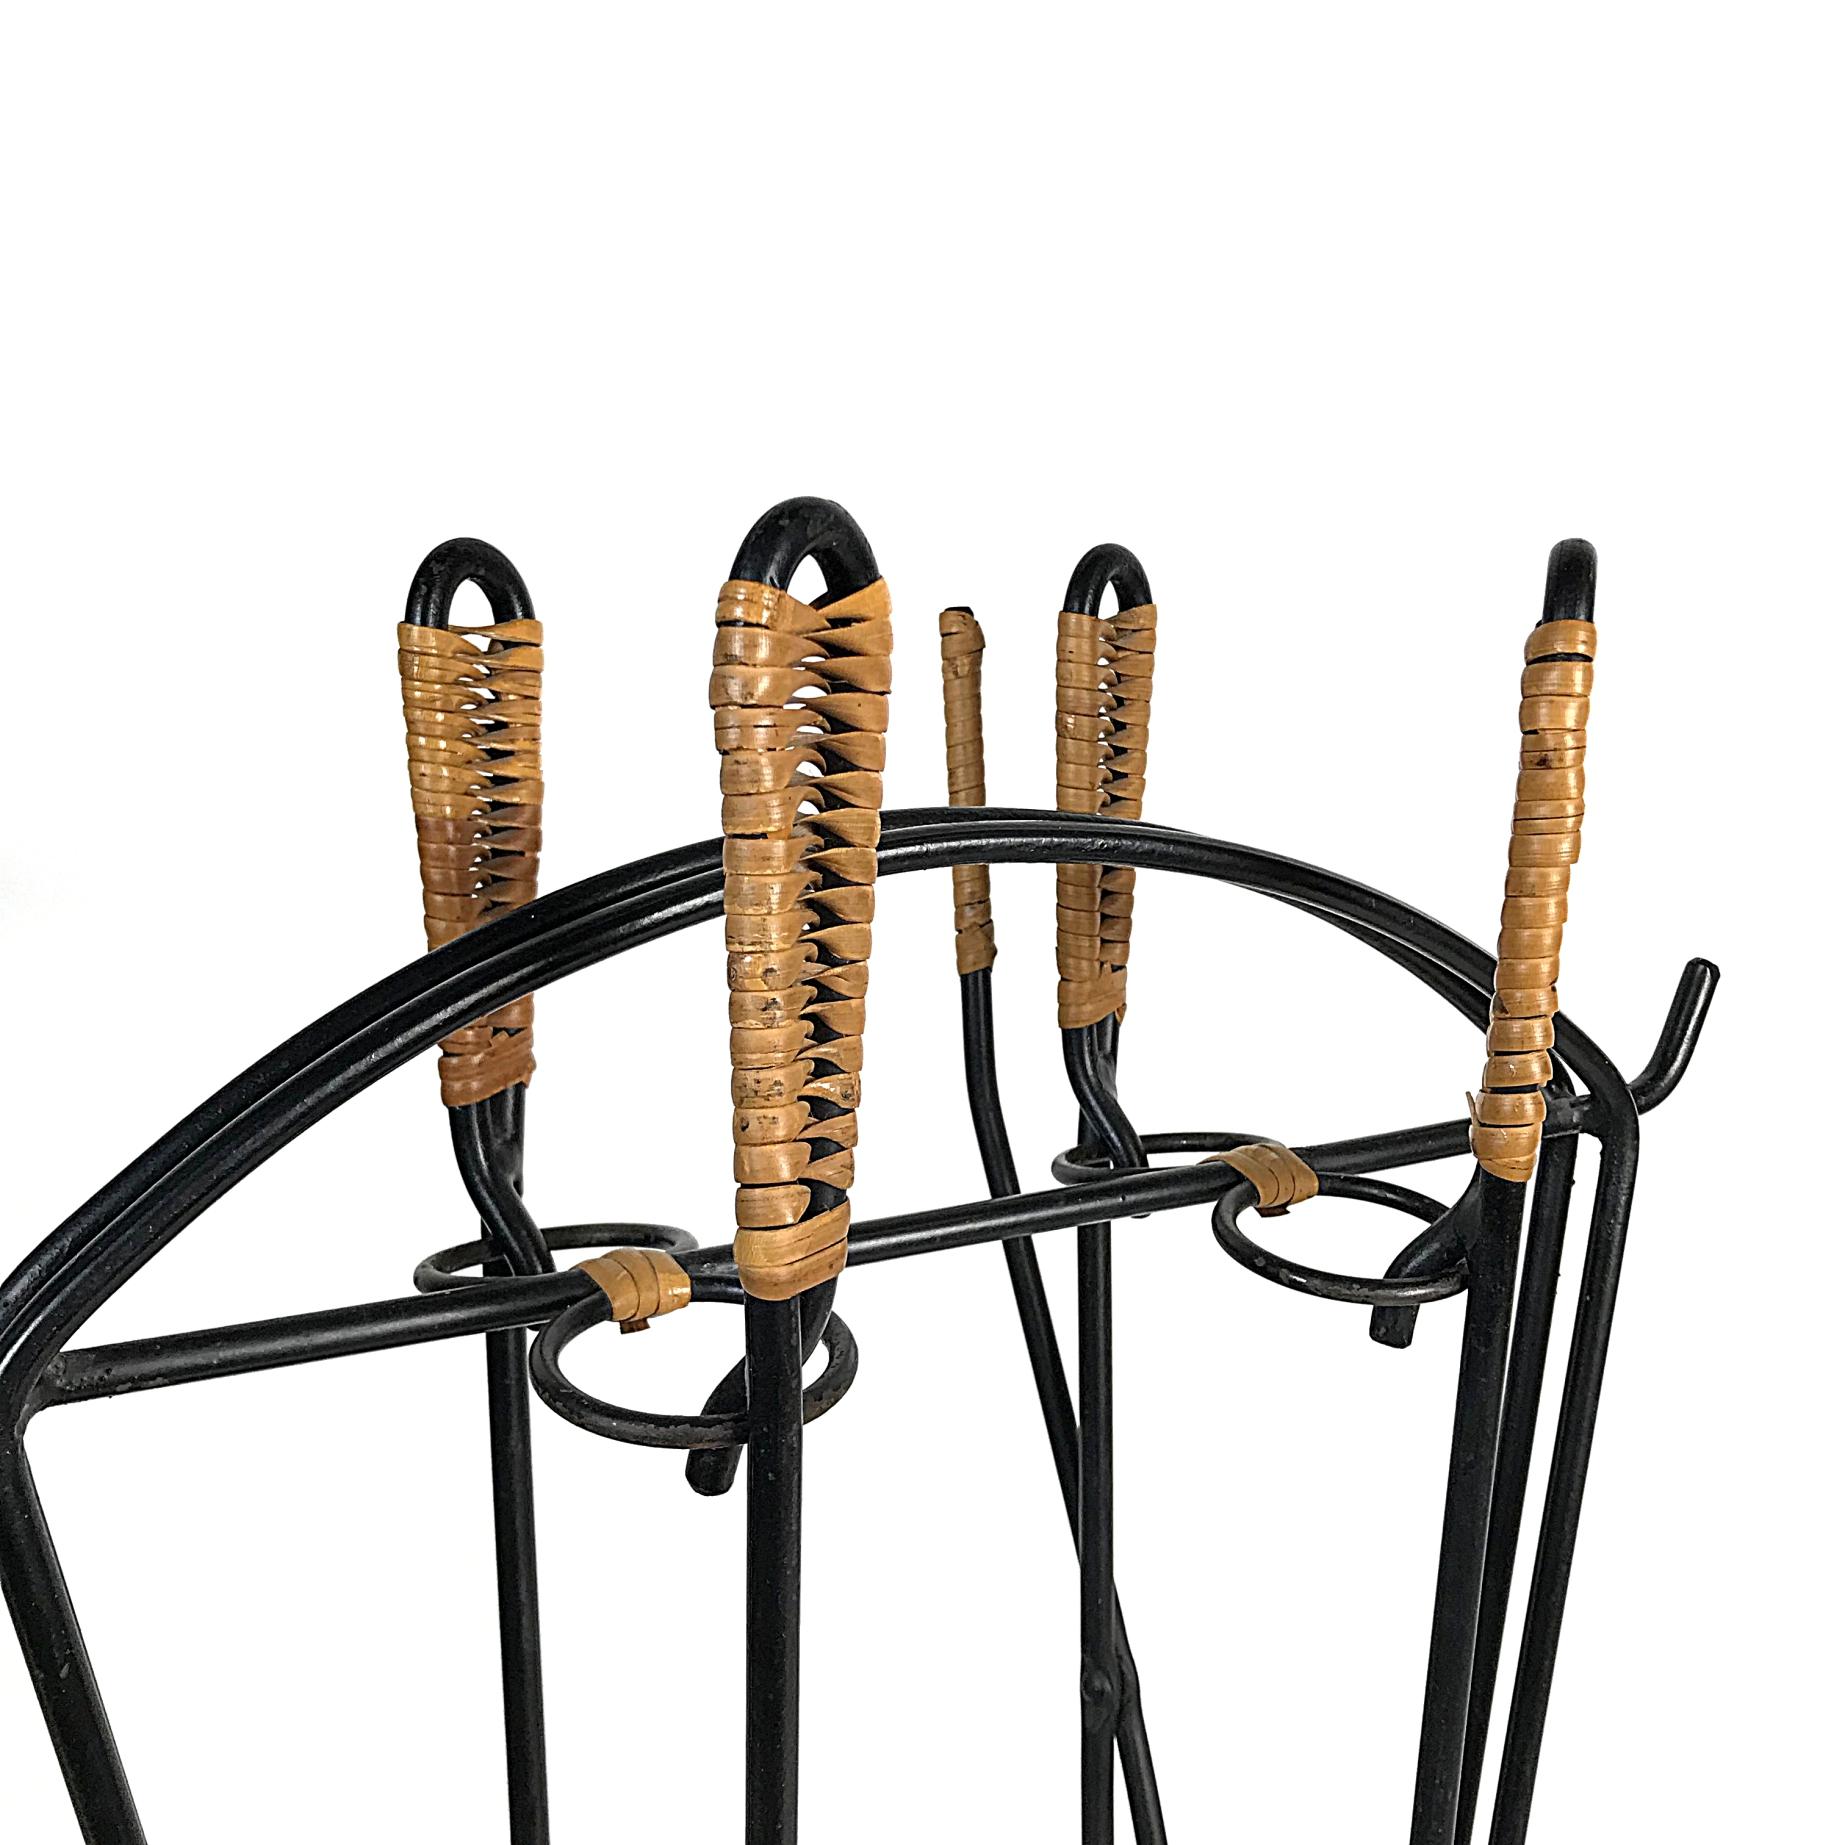 Simple and elegant midcentury fireplace tools in the style of Carl Auböck manufactured in the 1950s, Germany. Black lacquered wrought iron with woven rattan handles. The set is in excellent condition.